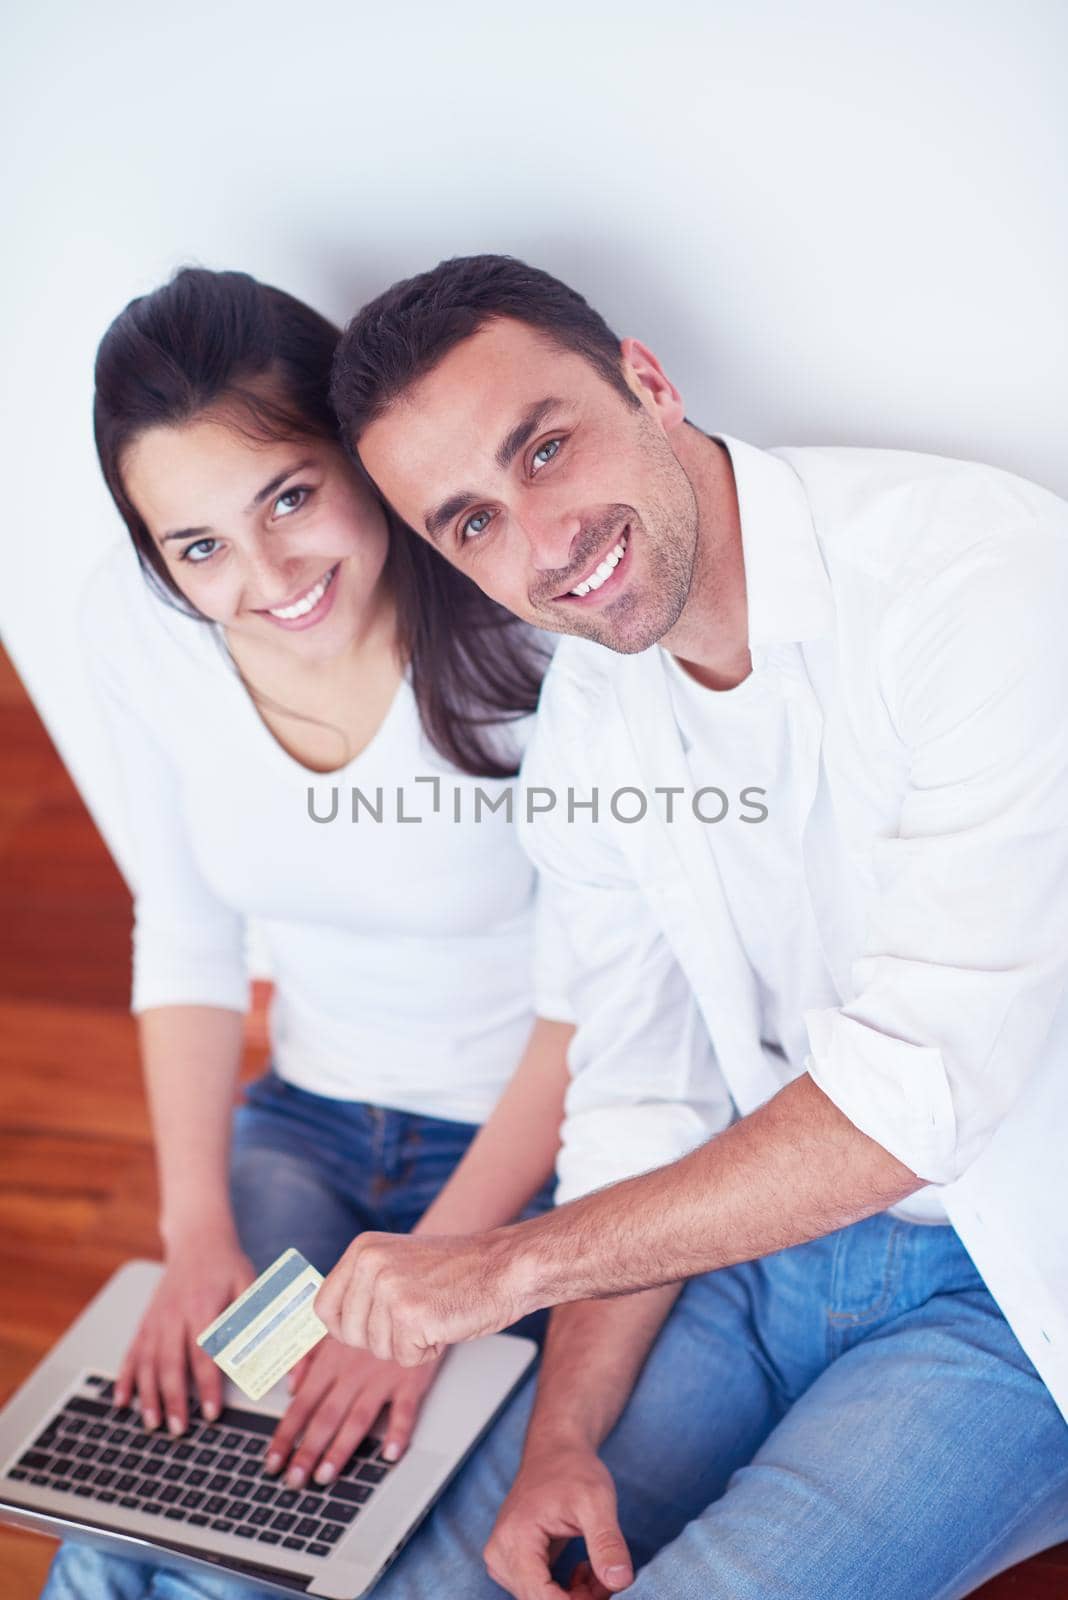 happy young relaxed  couple working on laptop computer at modern home interior